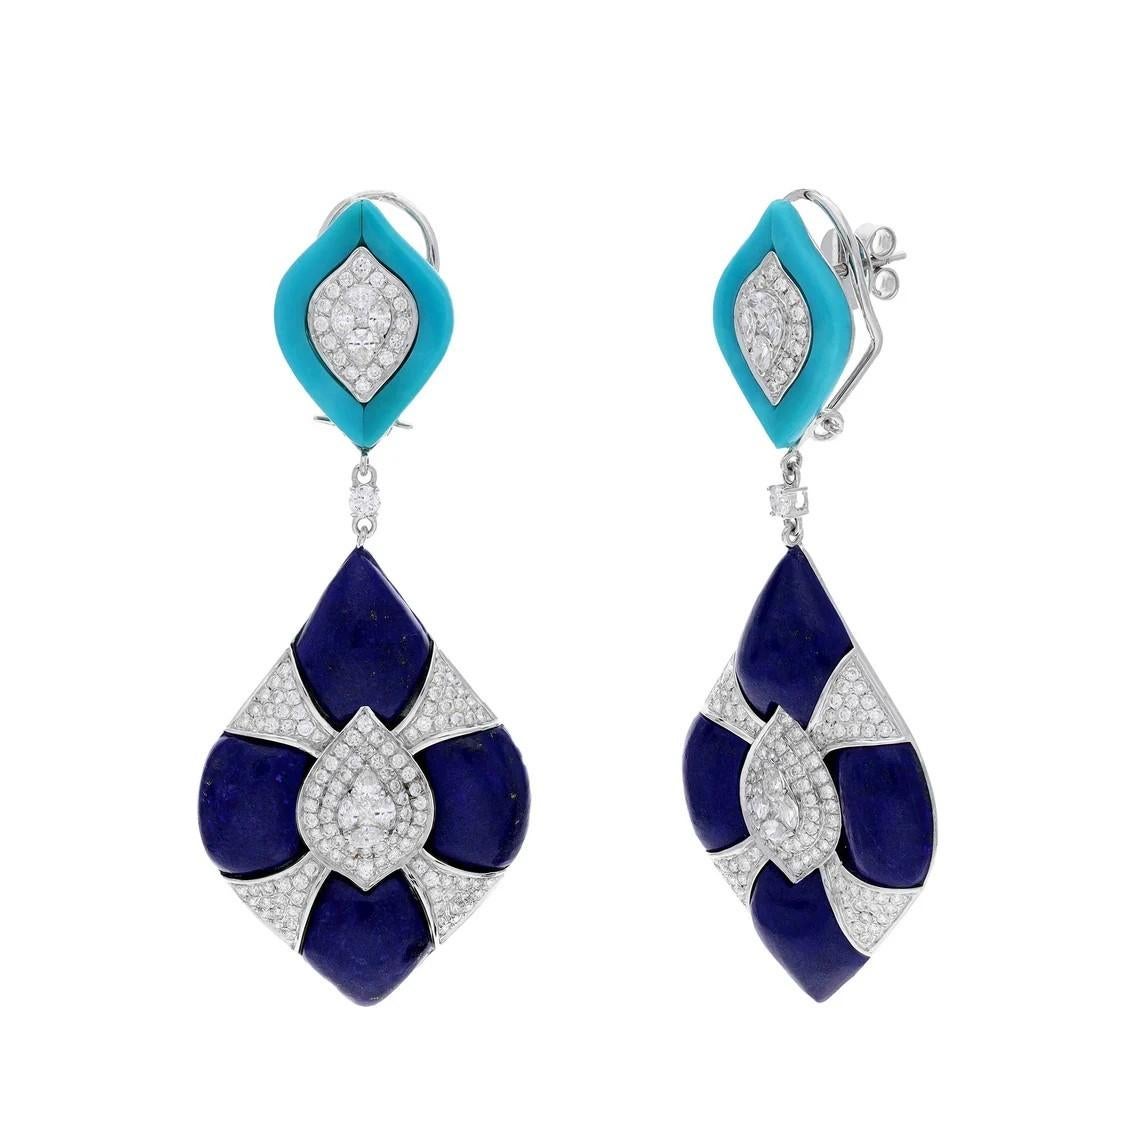 Handcrafted from 18-karat gold, these exquisite drop earrings are set with 32.20 carats Lapis, 4.60 carat Turquoise and .18 carats of glimmering diamonds. 

FOLLOW MEGHNA JEWELS storefront to view the latest collection & exclusive pieces.  Meghna